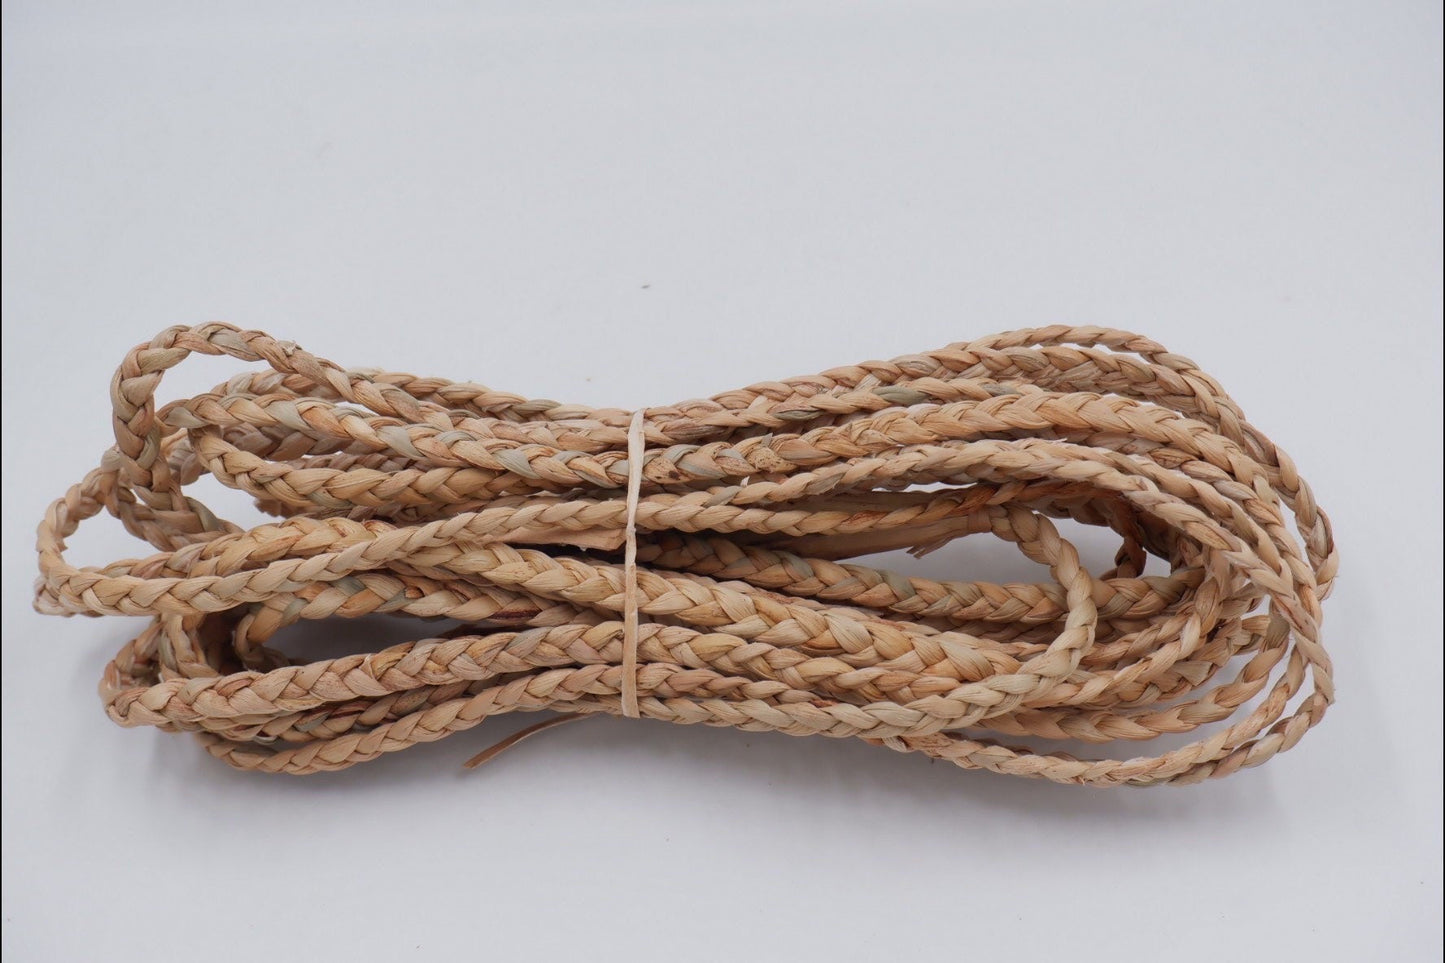 12mm Braided Rope, natural water hyacinth rope, 1/2 inches water hyacinth rope, natural rope for furniture, Seagrass rope